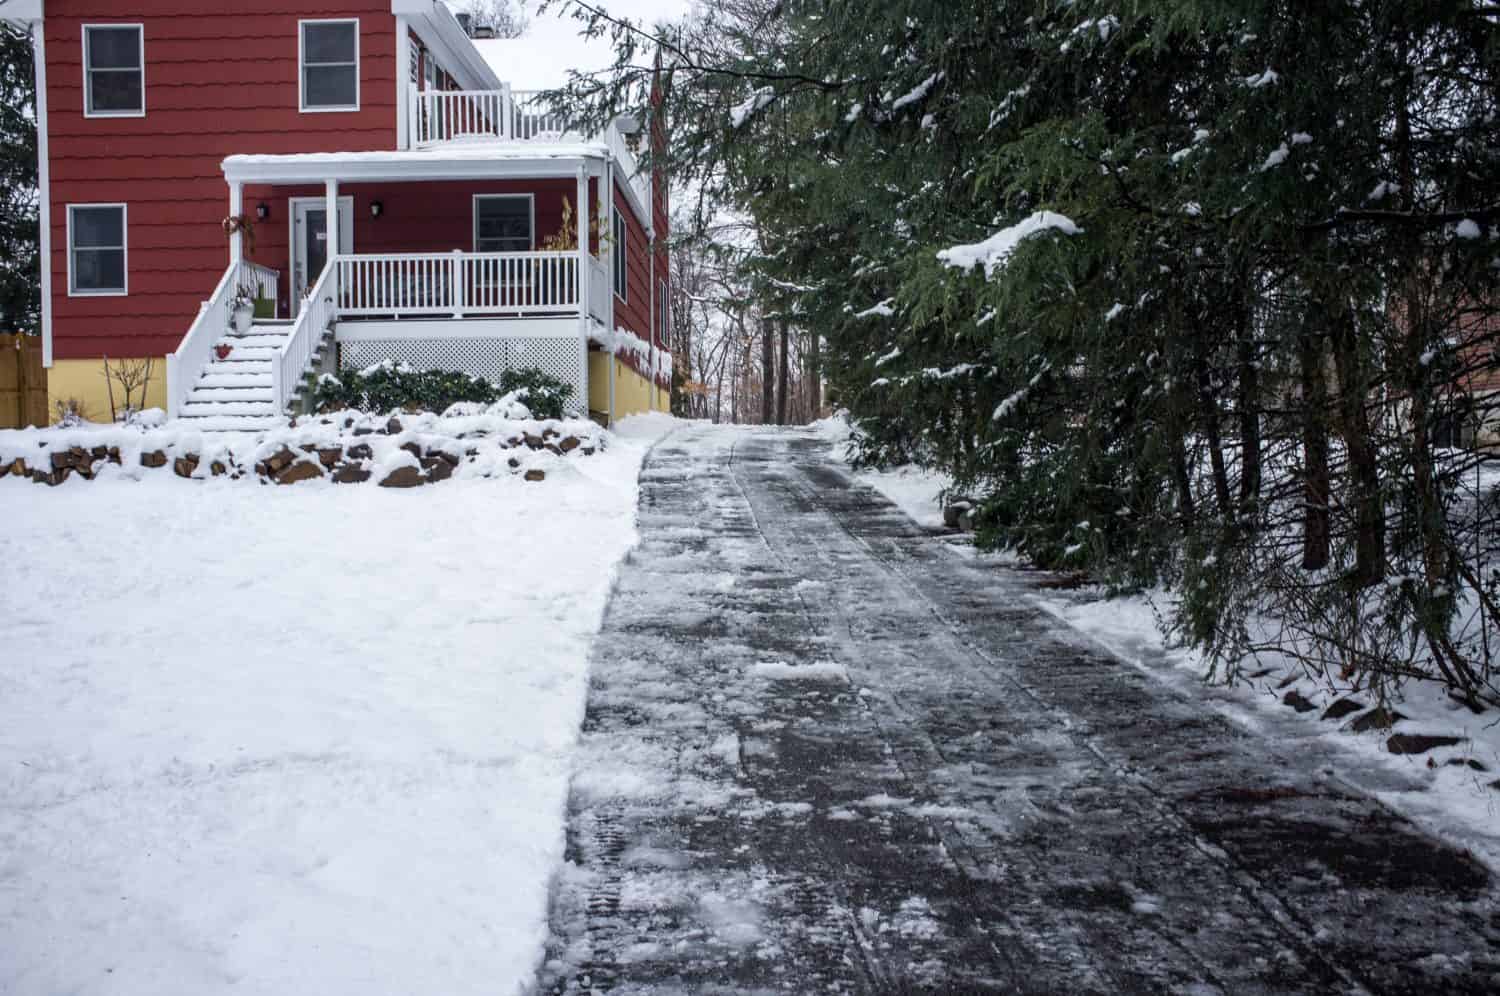 driveway after clean up from the snow, red suburban house in North America